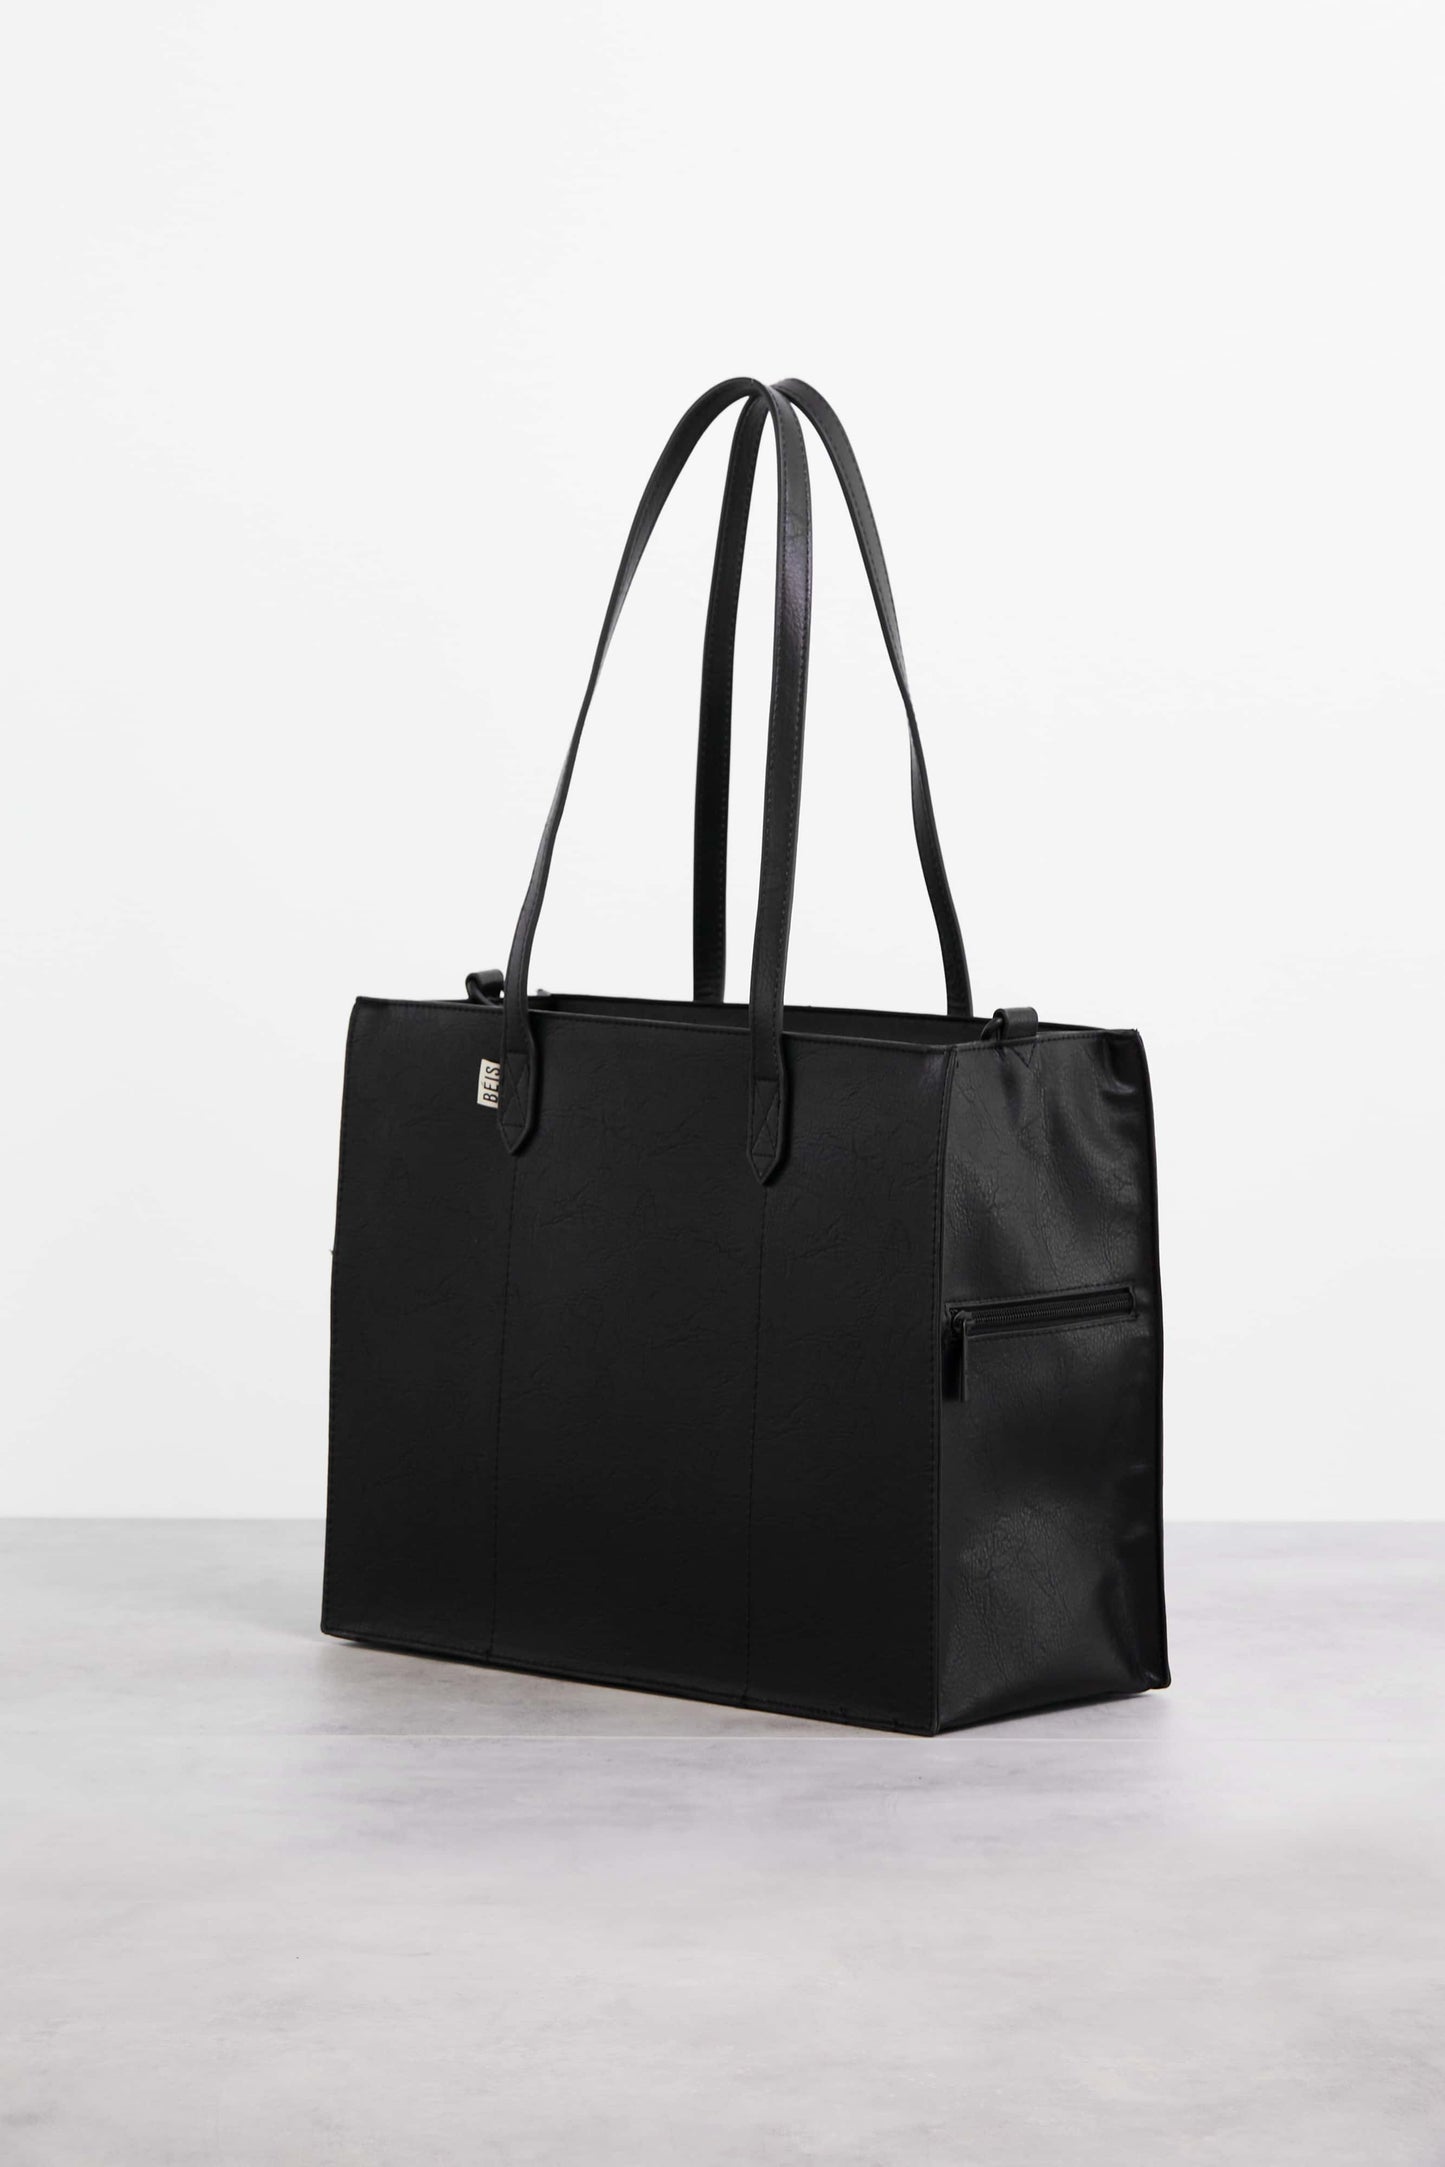 Mini Work Tote Black Front and Side Angle